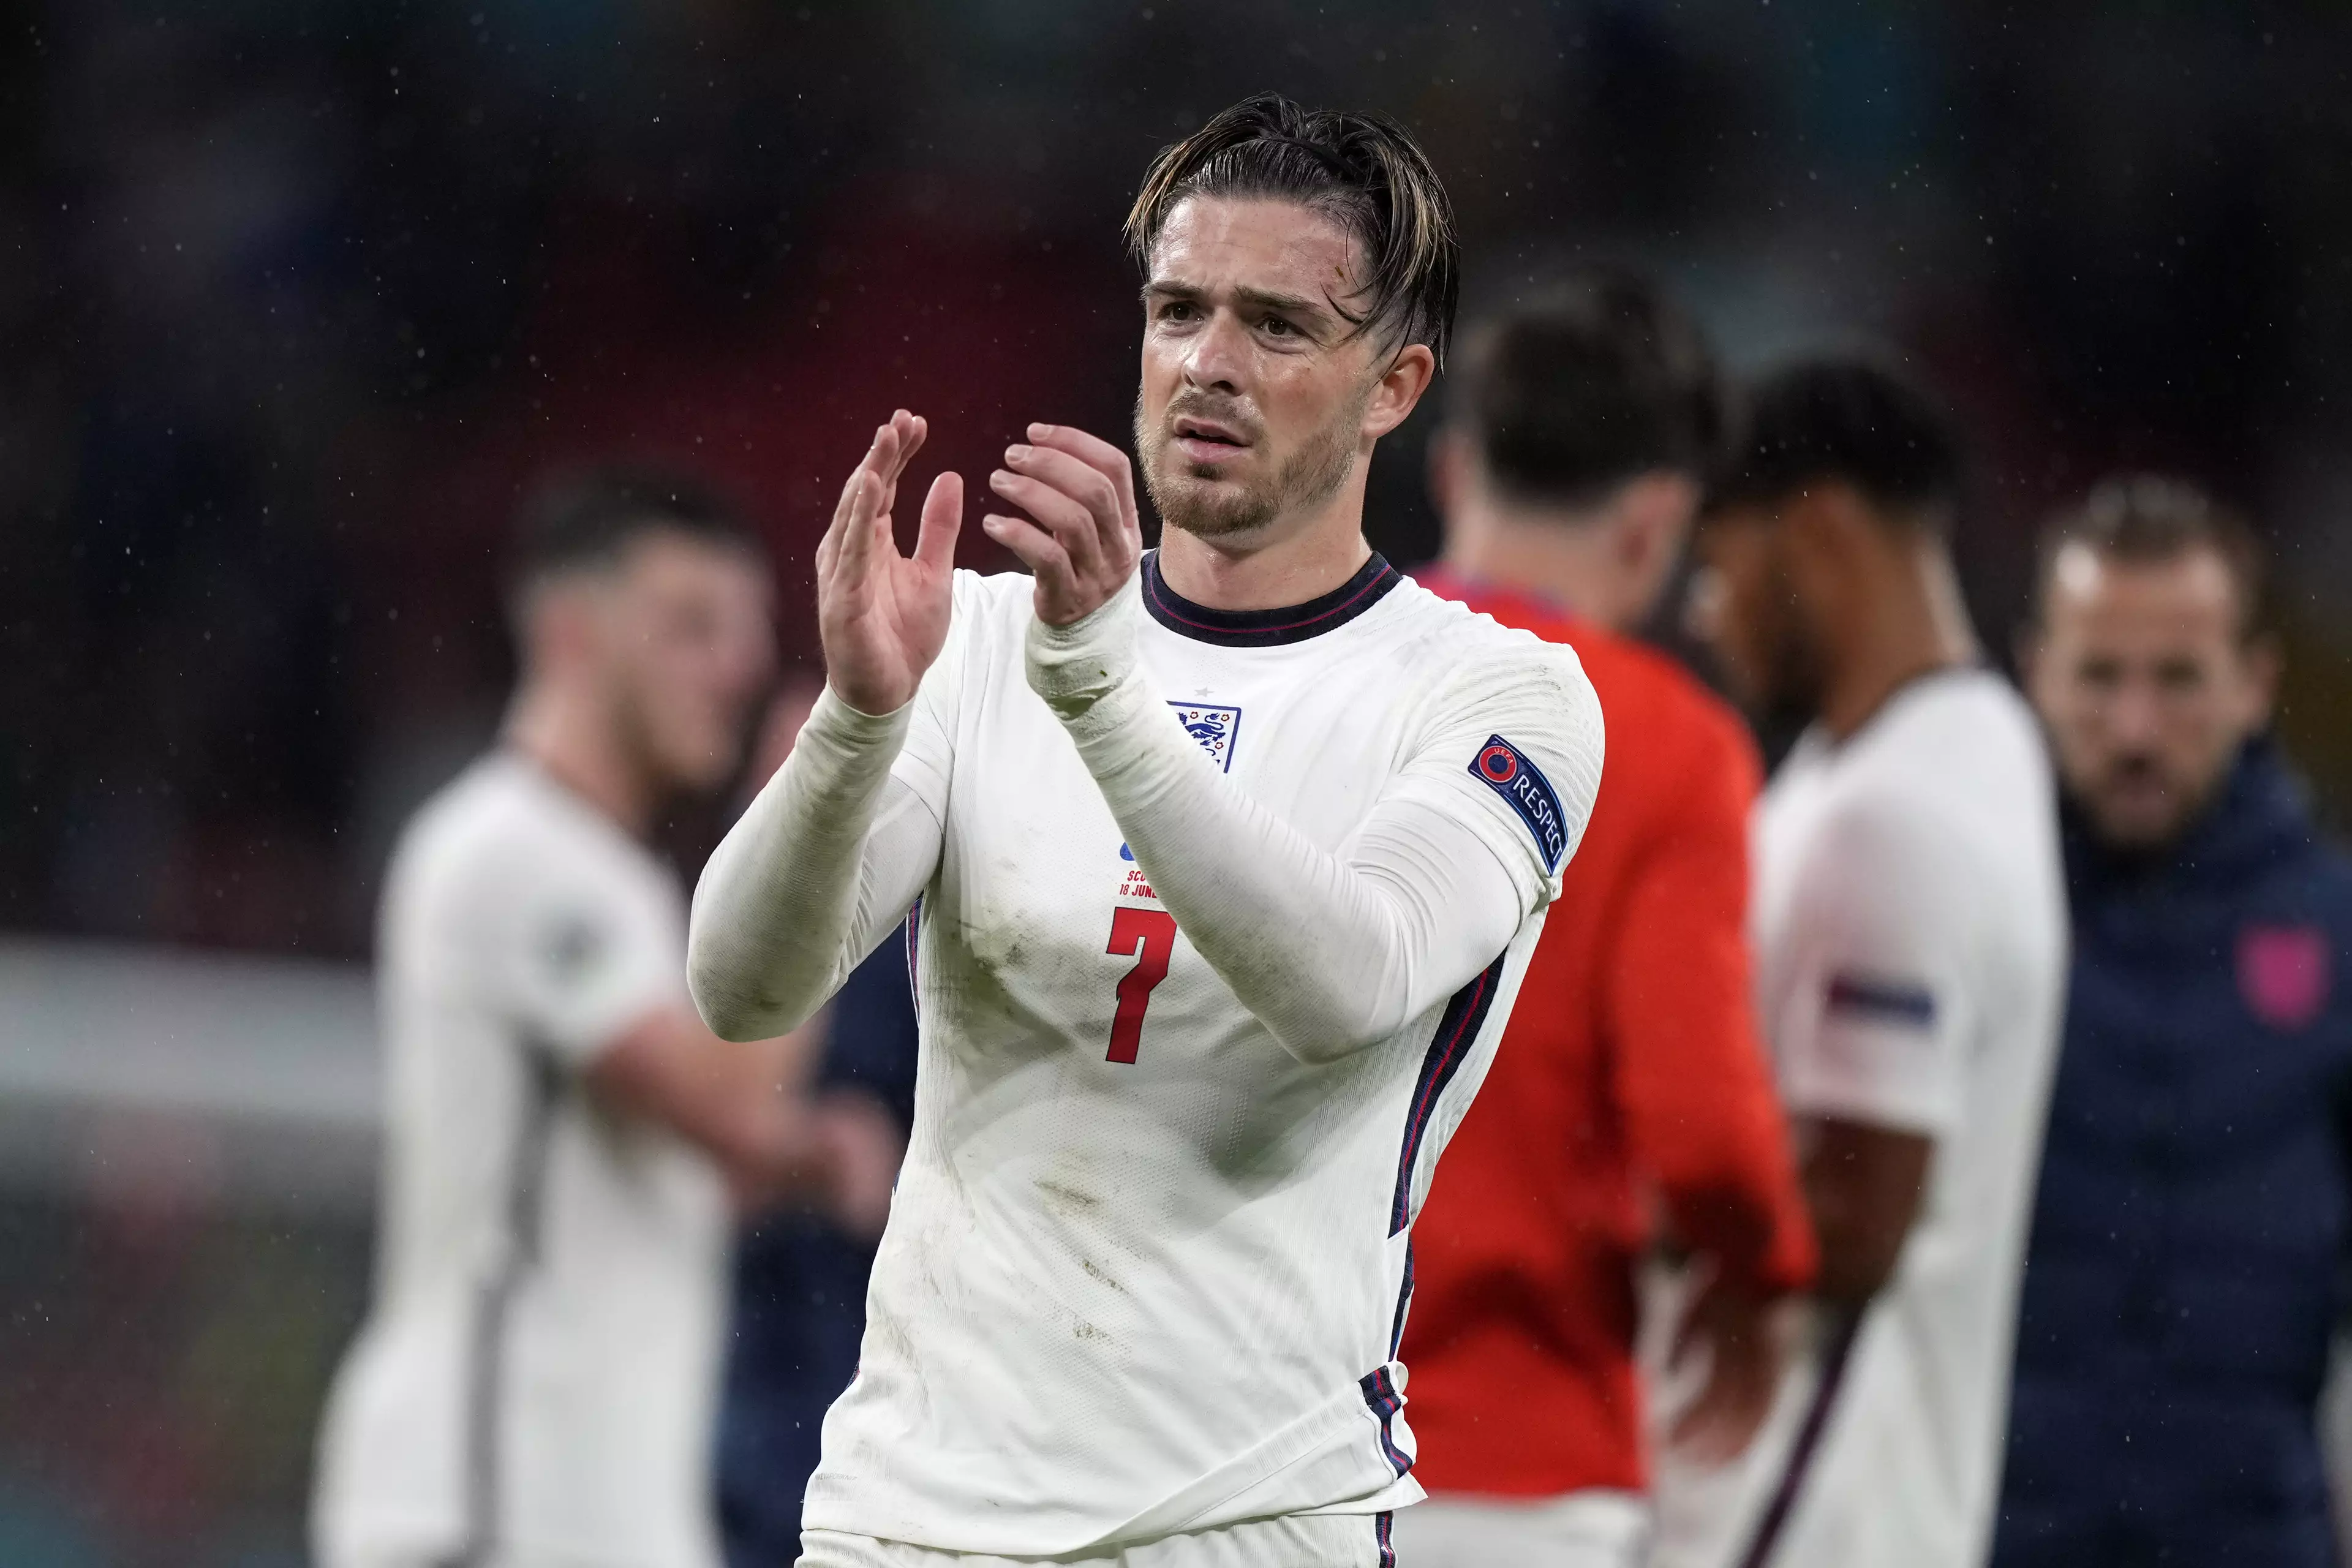 Jack Grealish is likely to start after an impressive cameo against Scotland on Friday